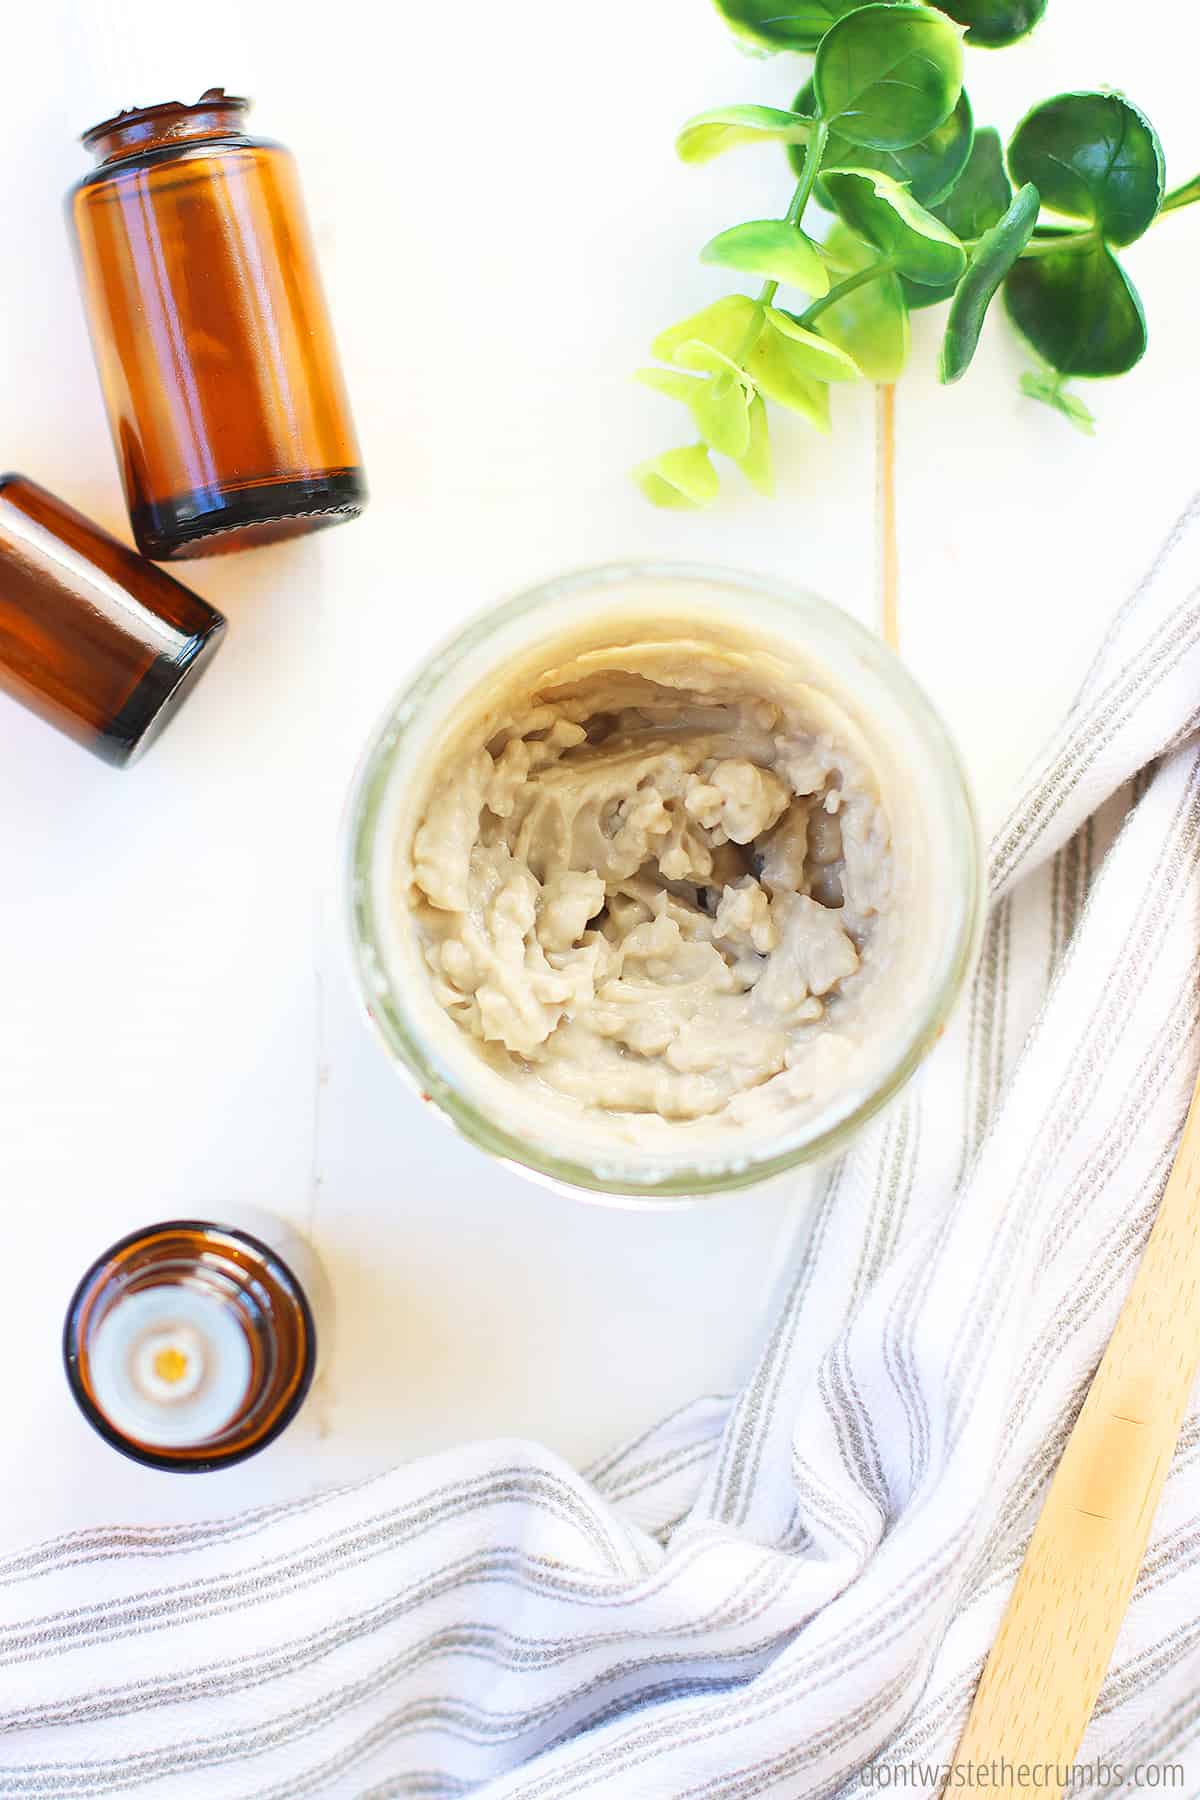 Freshly mixed remineralizing toothpaste using bentonite clay to heal cavities. It's the best natural toothpaste we've ever tried, and our dentist agrees! 